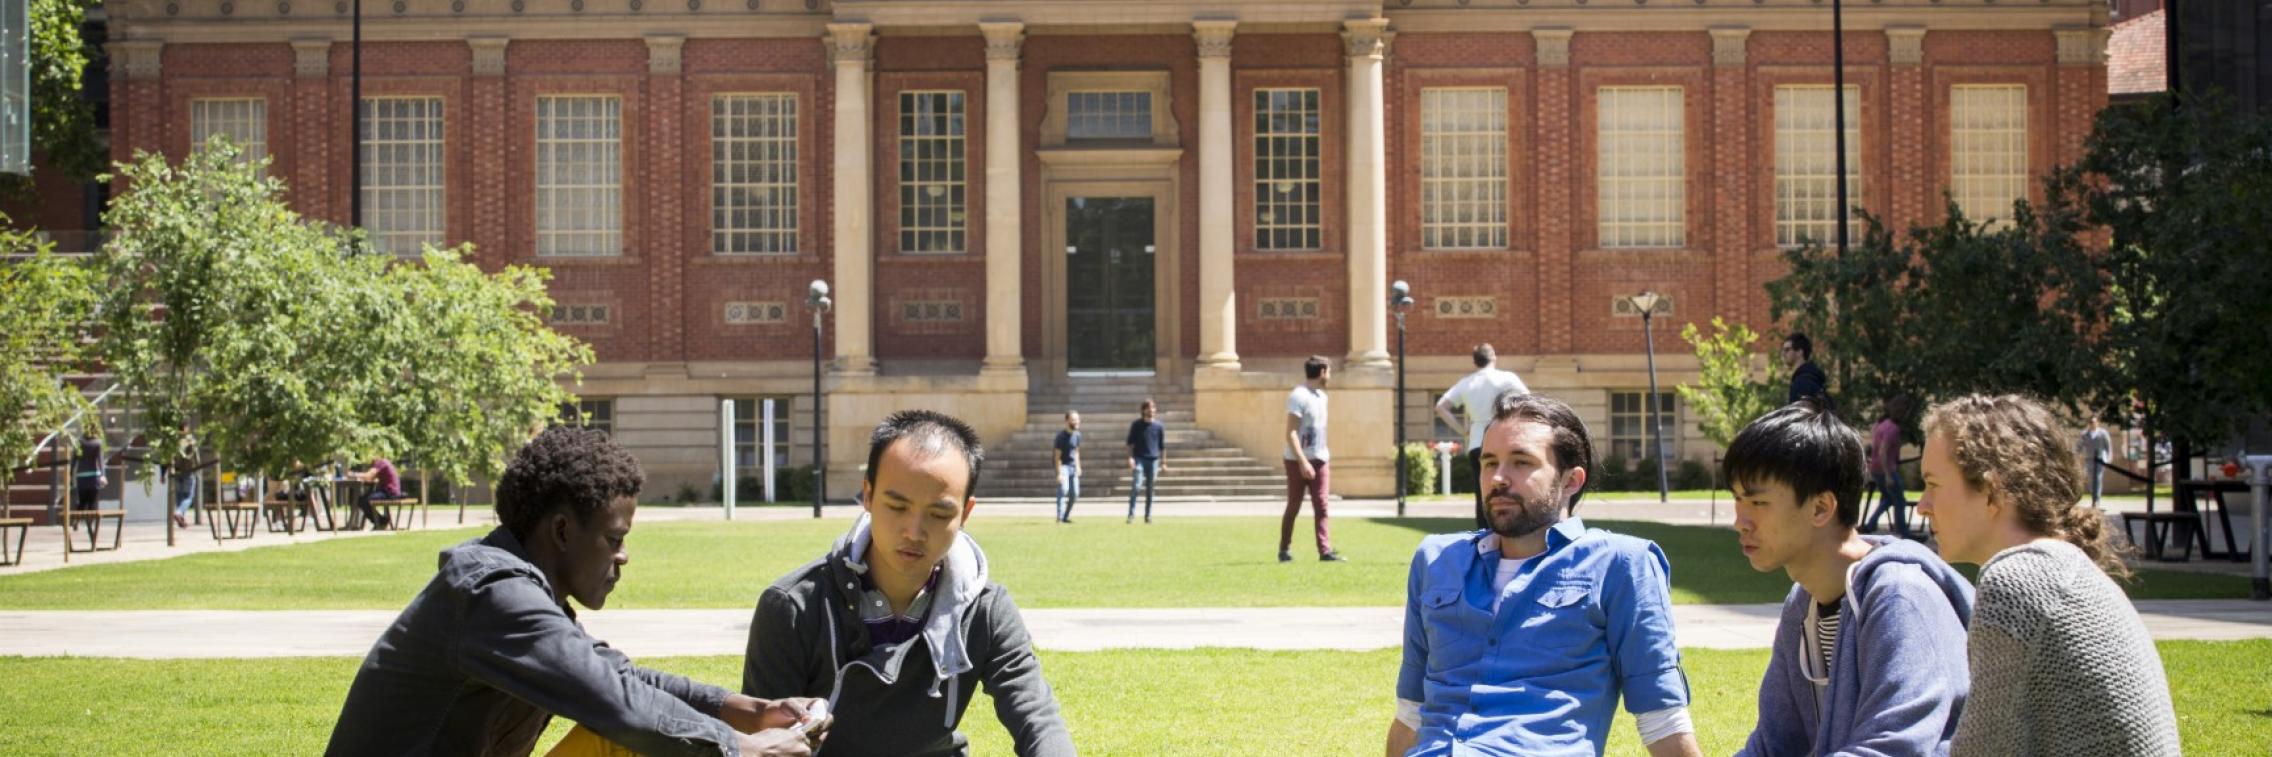 Students on the Maths Lawns